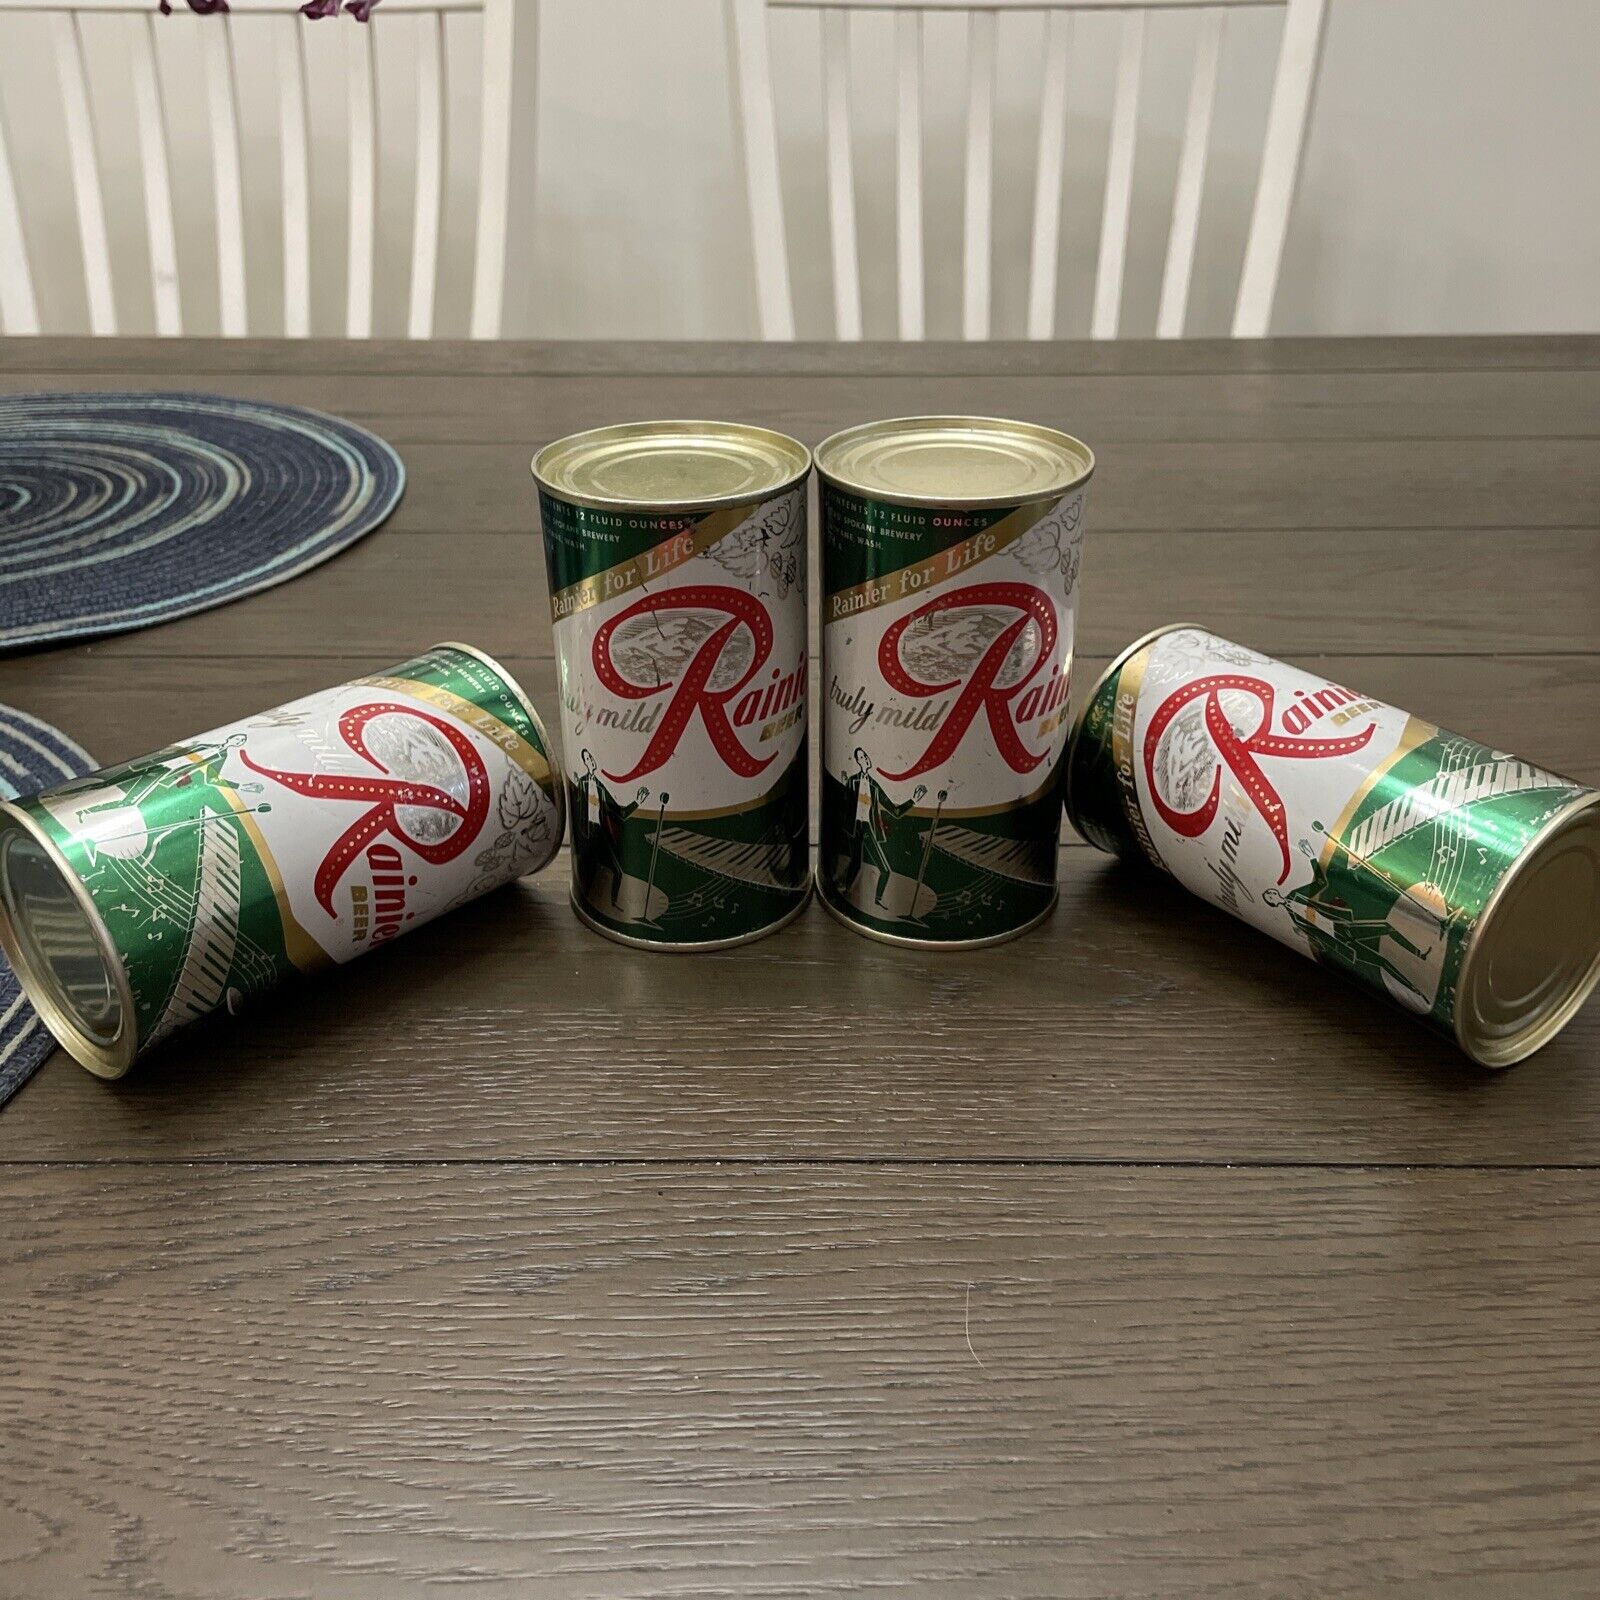 Rainier Beer Cans 4 Green Jubilee Cans